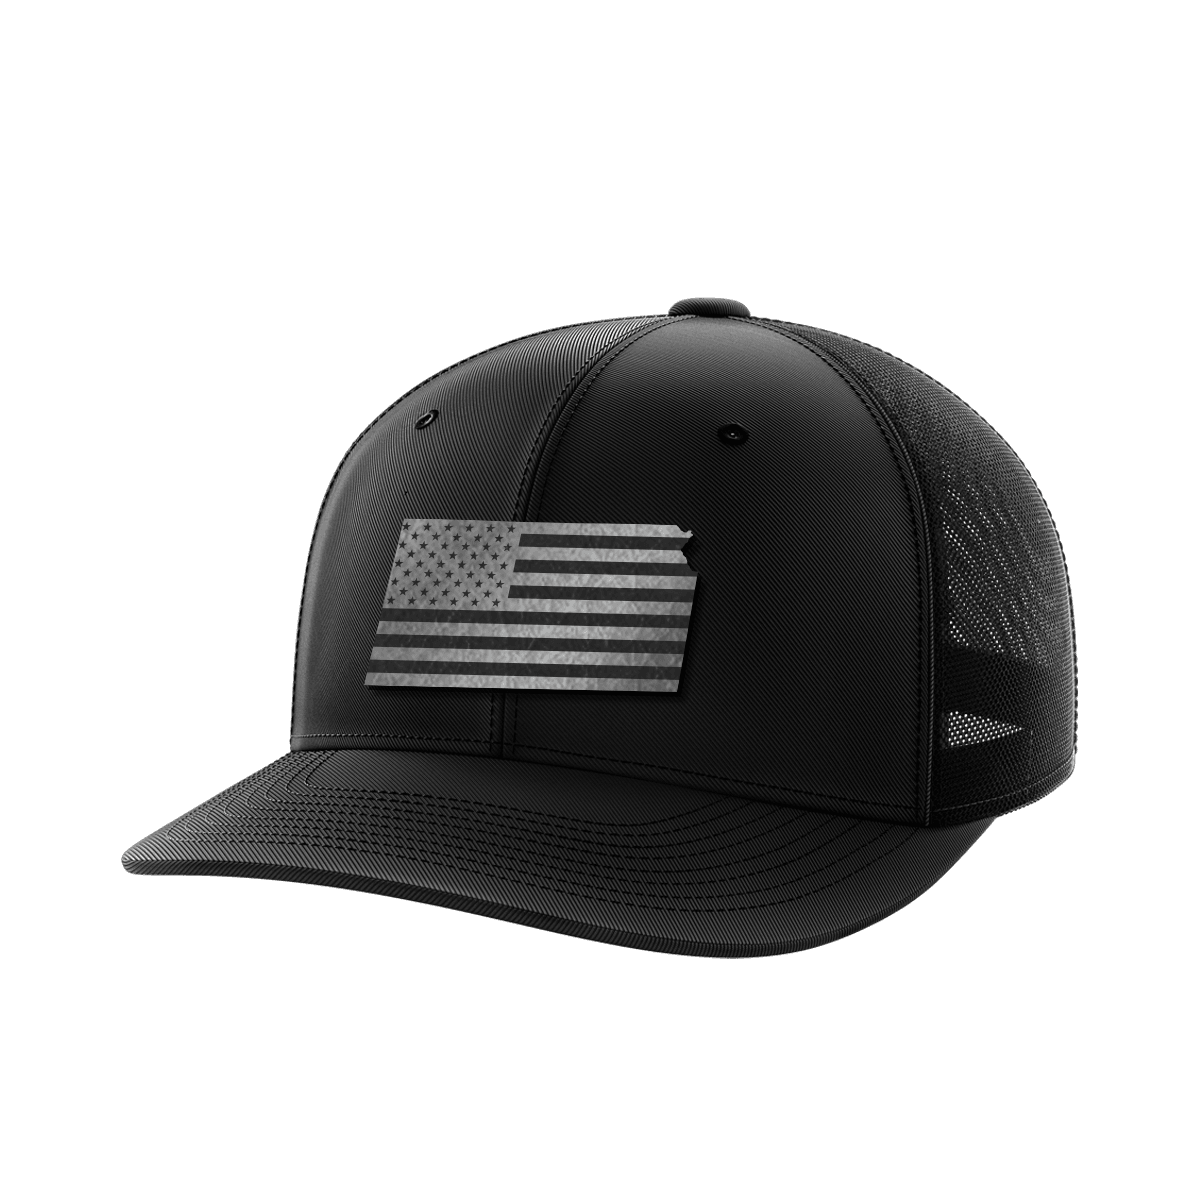 Kansas United Collection (black leather) - Greater Half